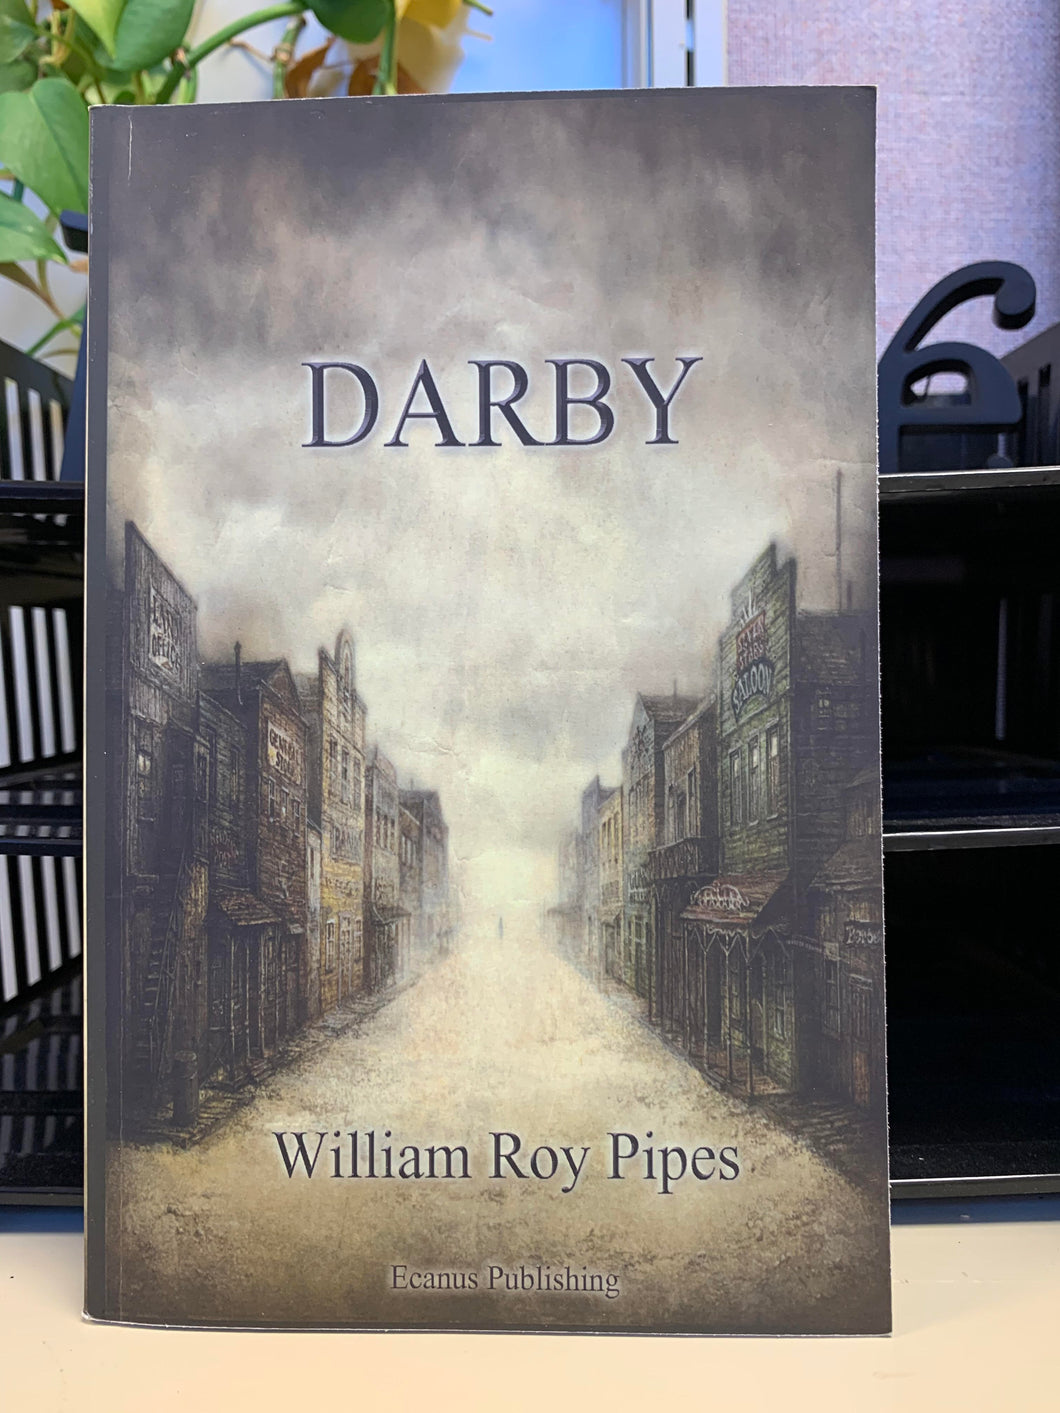 Darby by William Roy Pipes